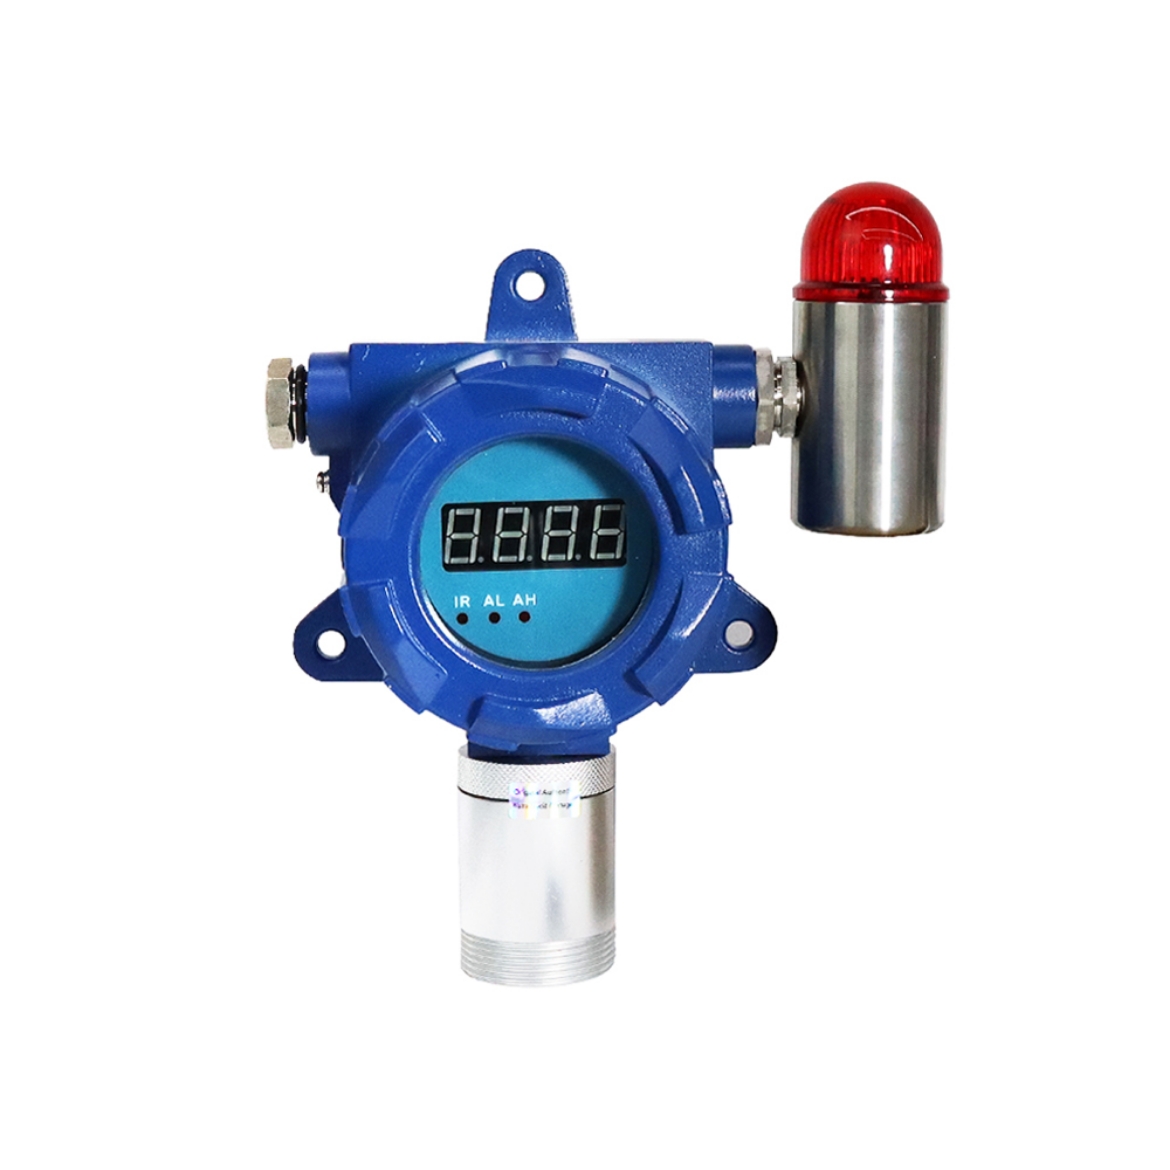 Fixed Oxygen (O2) Gas Detector